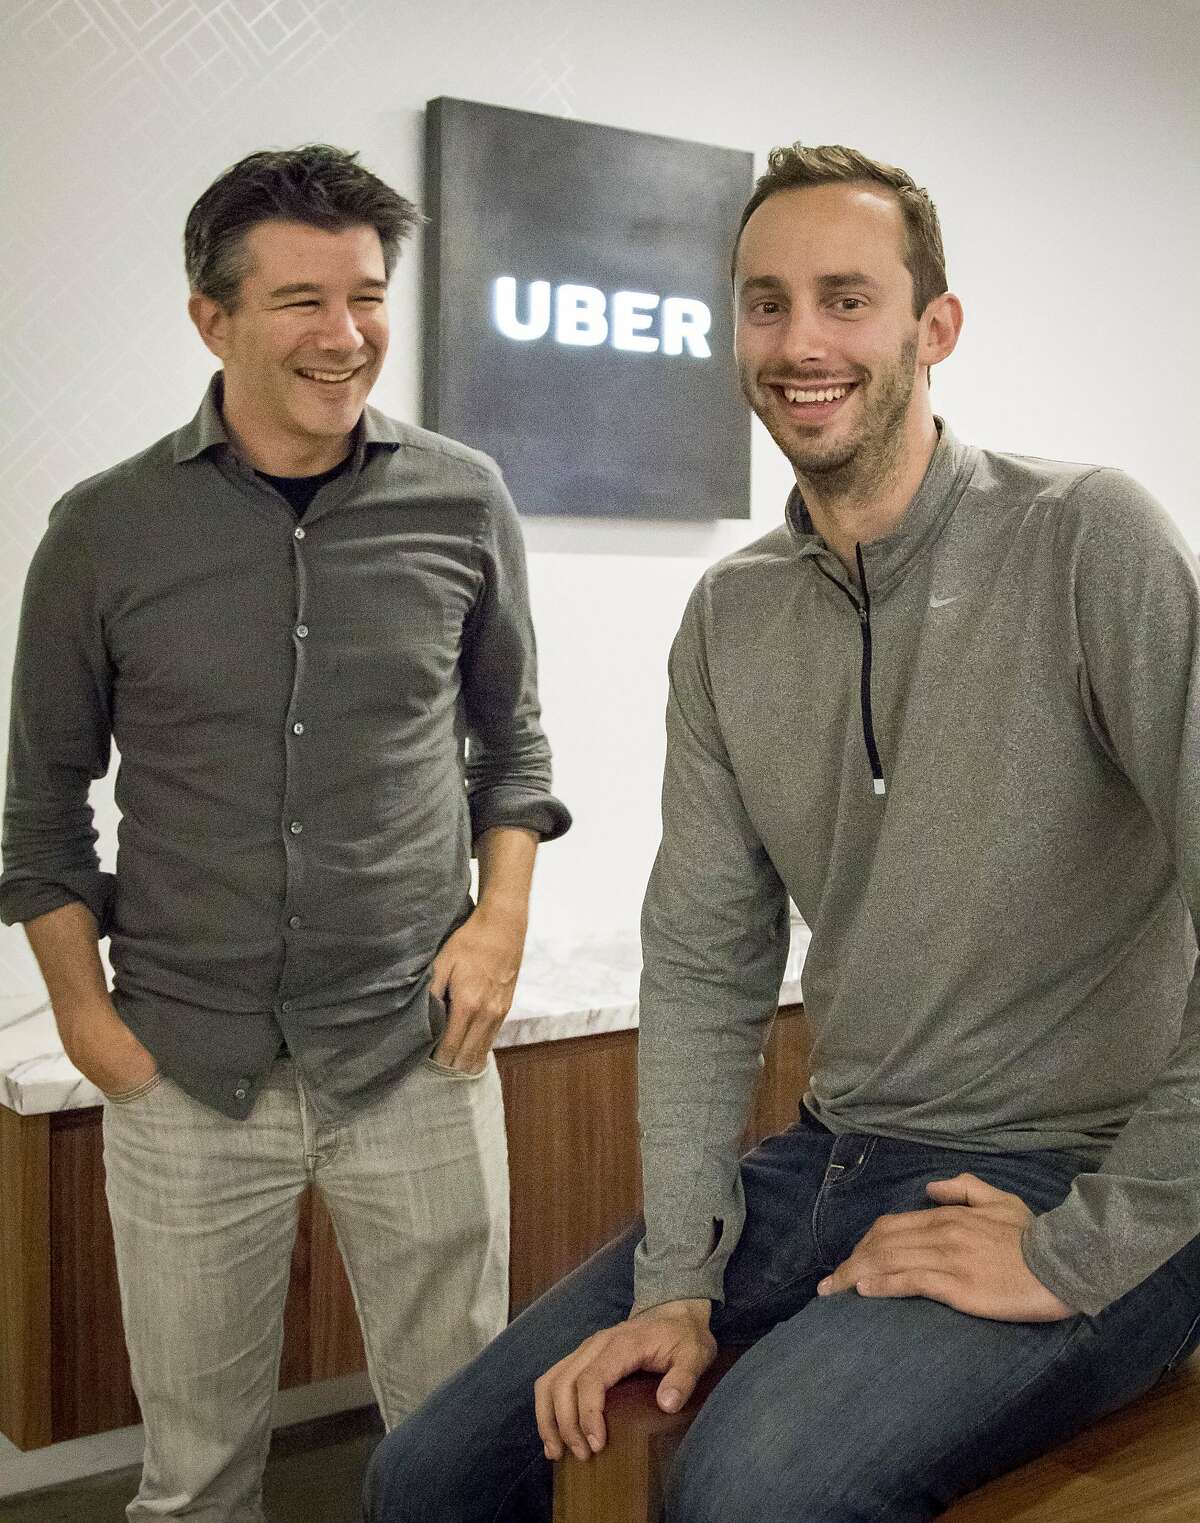 Uber CEO Travis Kalanick, left, and Anthony Levandowski, co-founder of Otto, pose for a photo in the lobby of Uber headquarters, Thursday, Aug. 18, 2016, in San Francisco. Uber announced that it is acquiring self-driving startup Otto, which has developed technology allowing big rigs to drive themselves. (AP Photo/Tony Avelar)